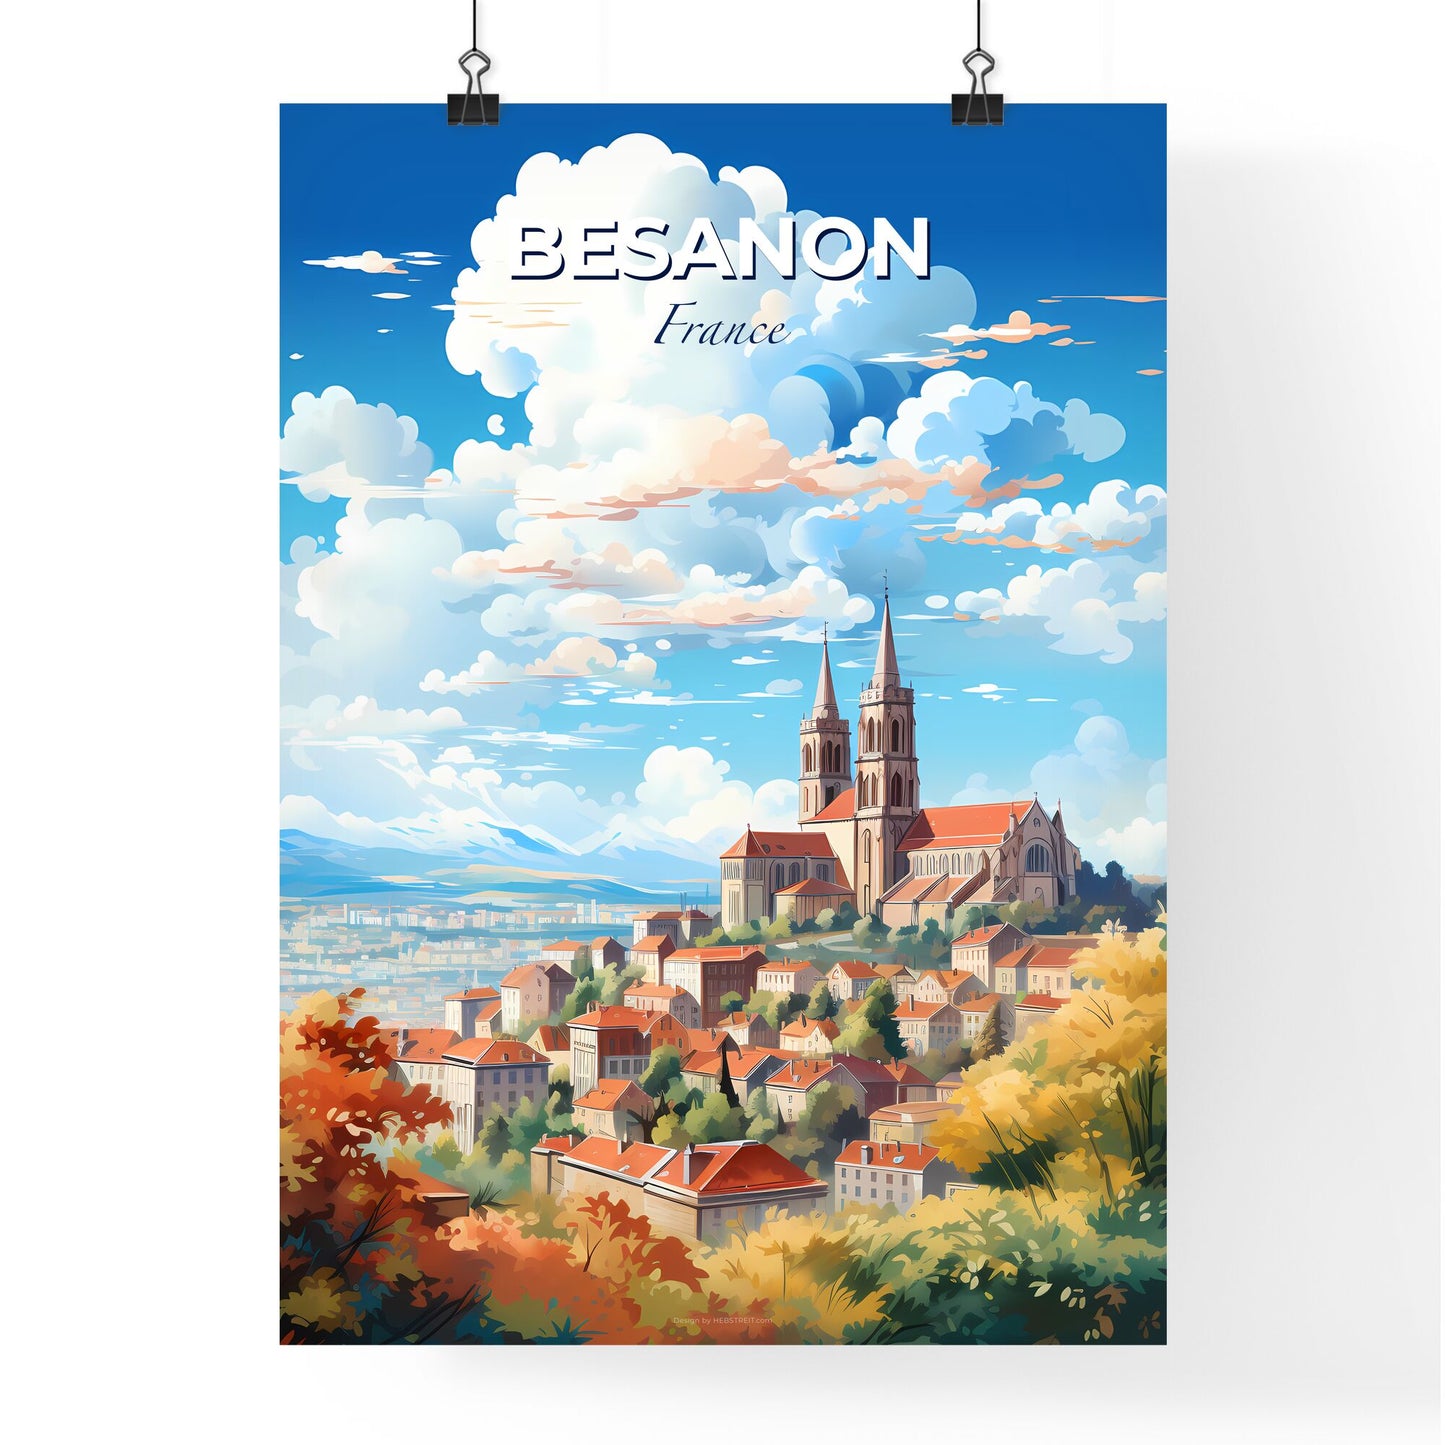 Besanon France Skyline - A City With A Church And Trees - Customizable Travel Gift Default Title